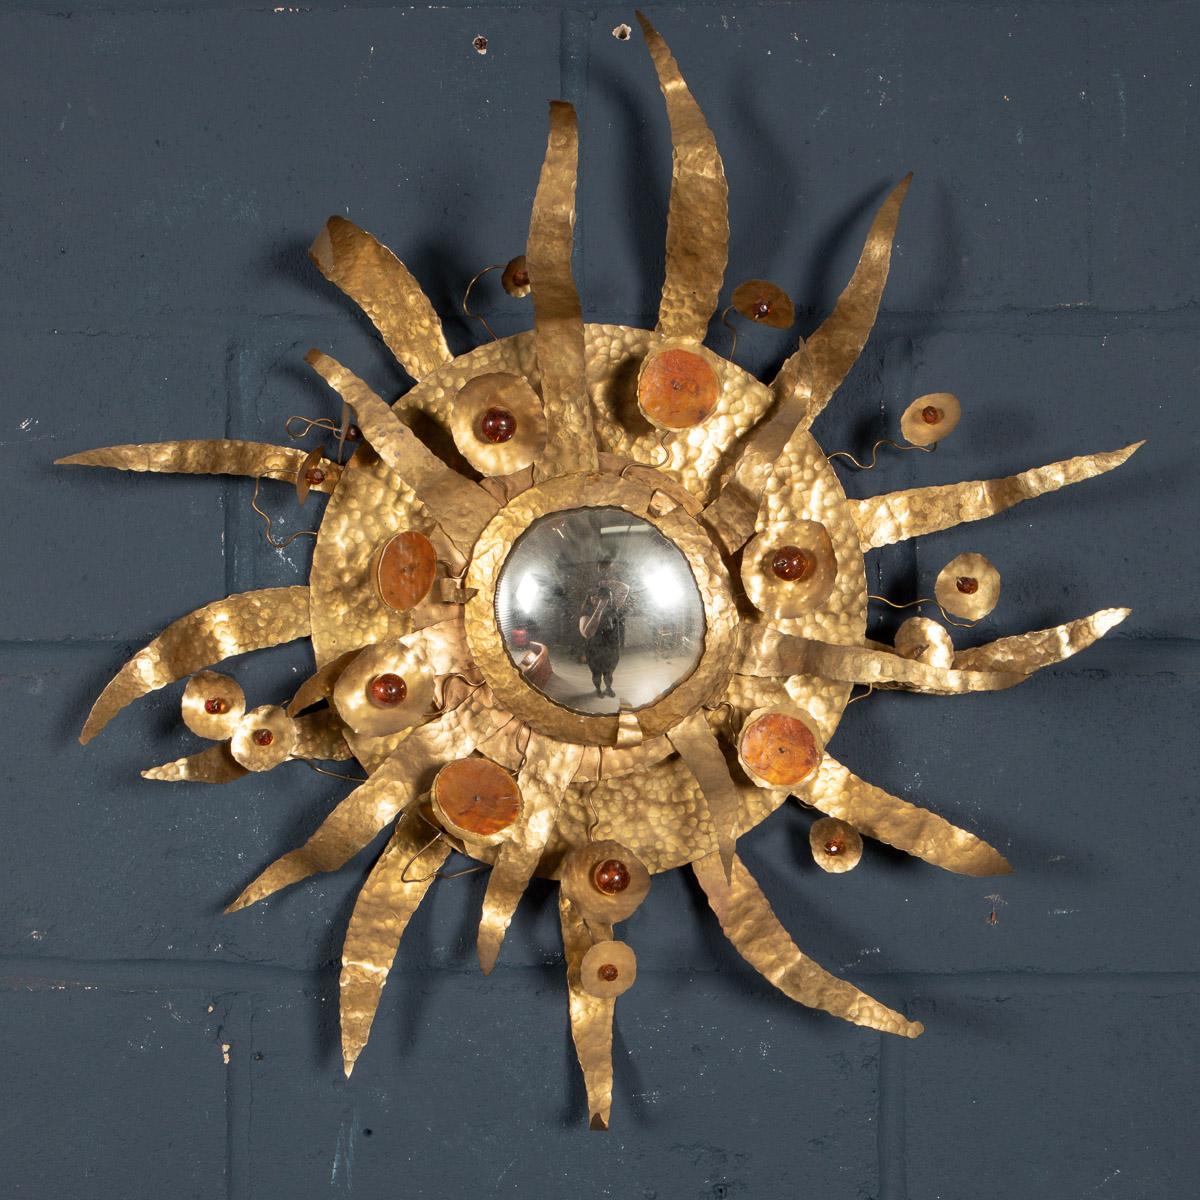 A wonderful and rare sunburst mirror made by Missoni, Italy circa 1980. A convex mirror surrounded by hammered brass and glass cabochons, this is an extremely eccentric item of furniture sure to capture attention and uplift any